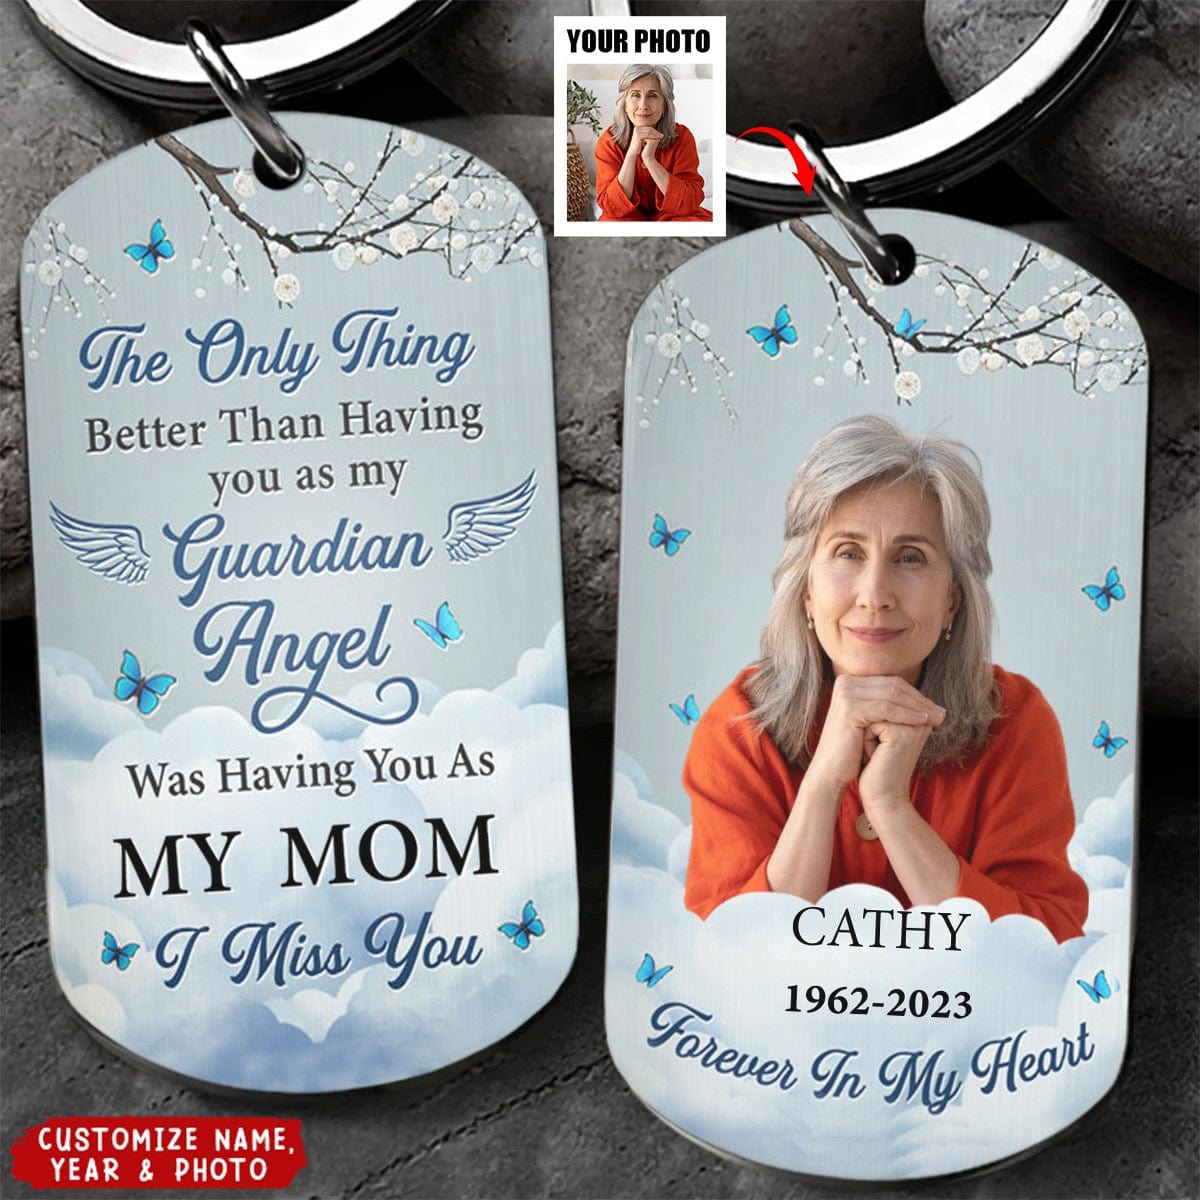 Having You As Guardian Angel - Personalized Photo Stainless Steel Keychain